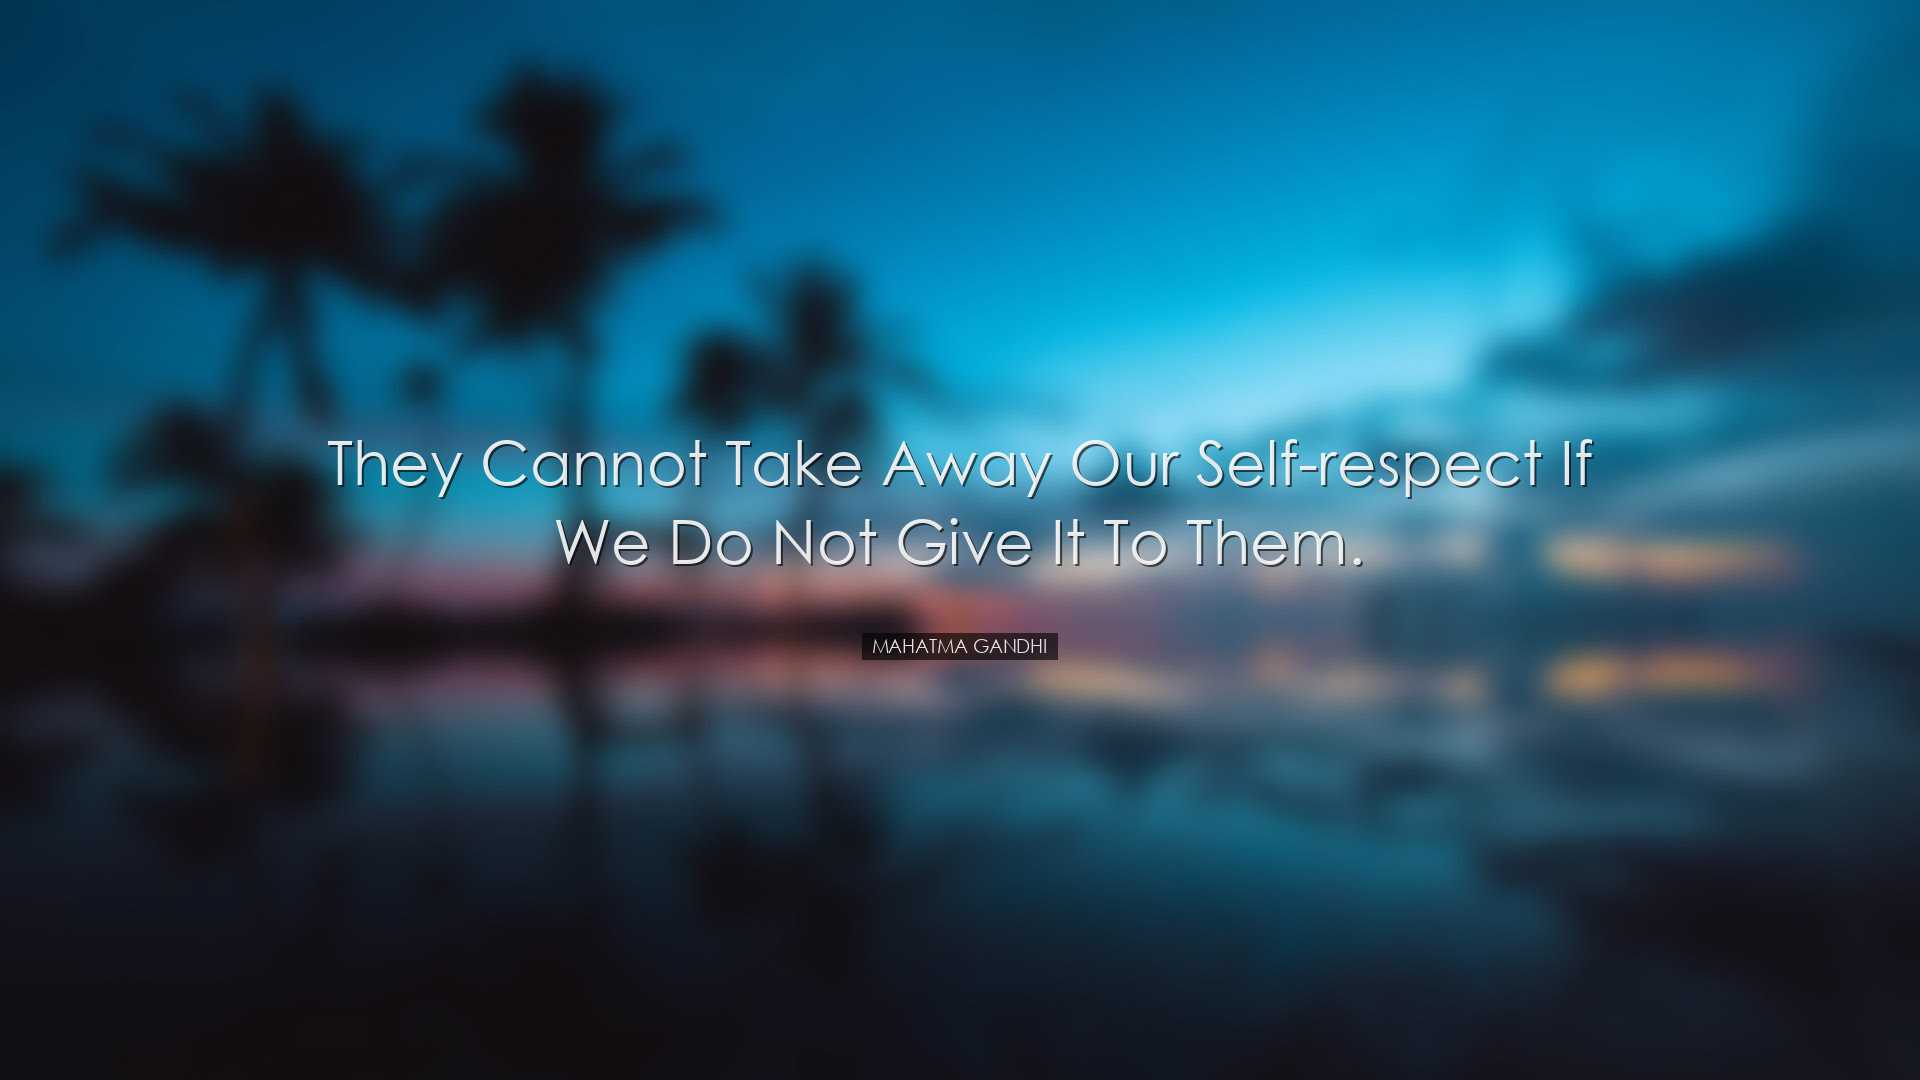 They cannot take away our self-respect if we do not give it to the